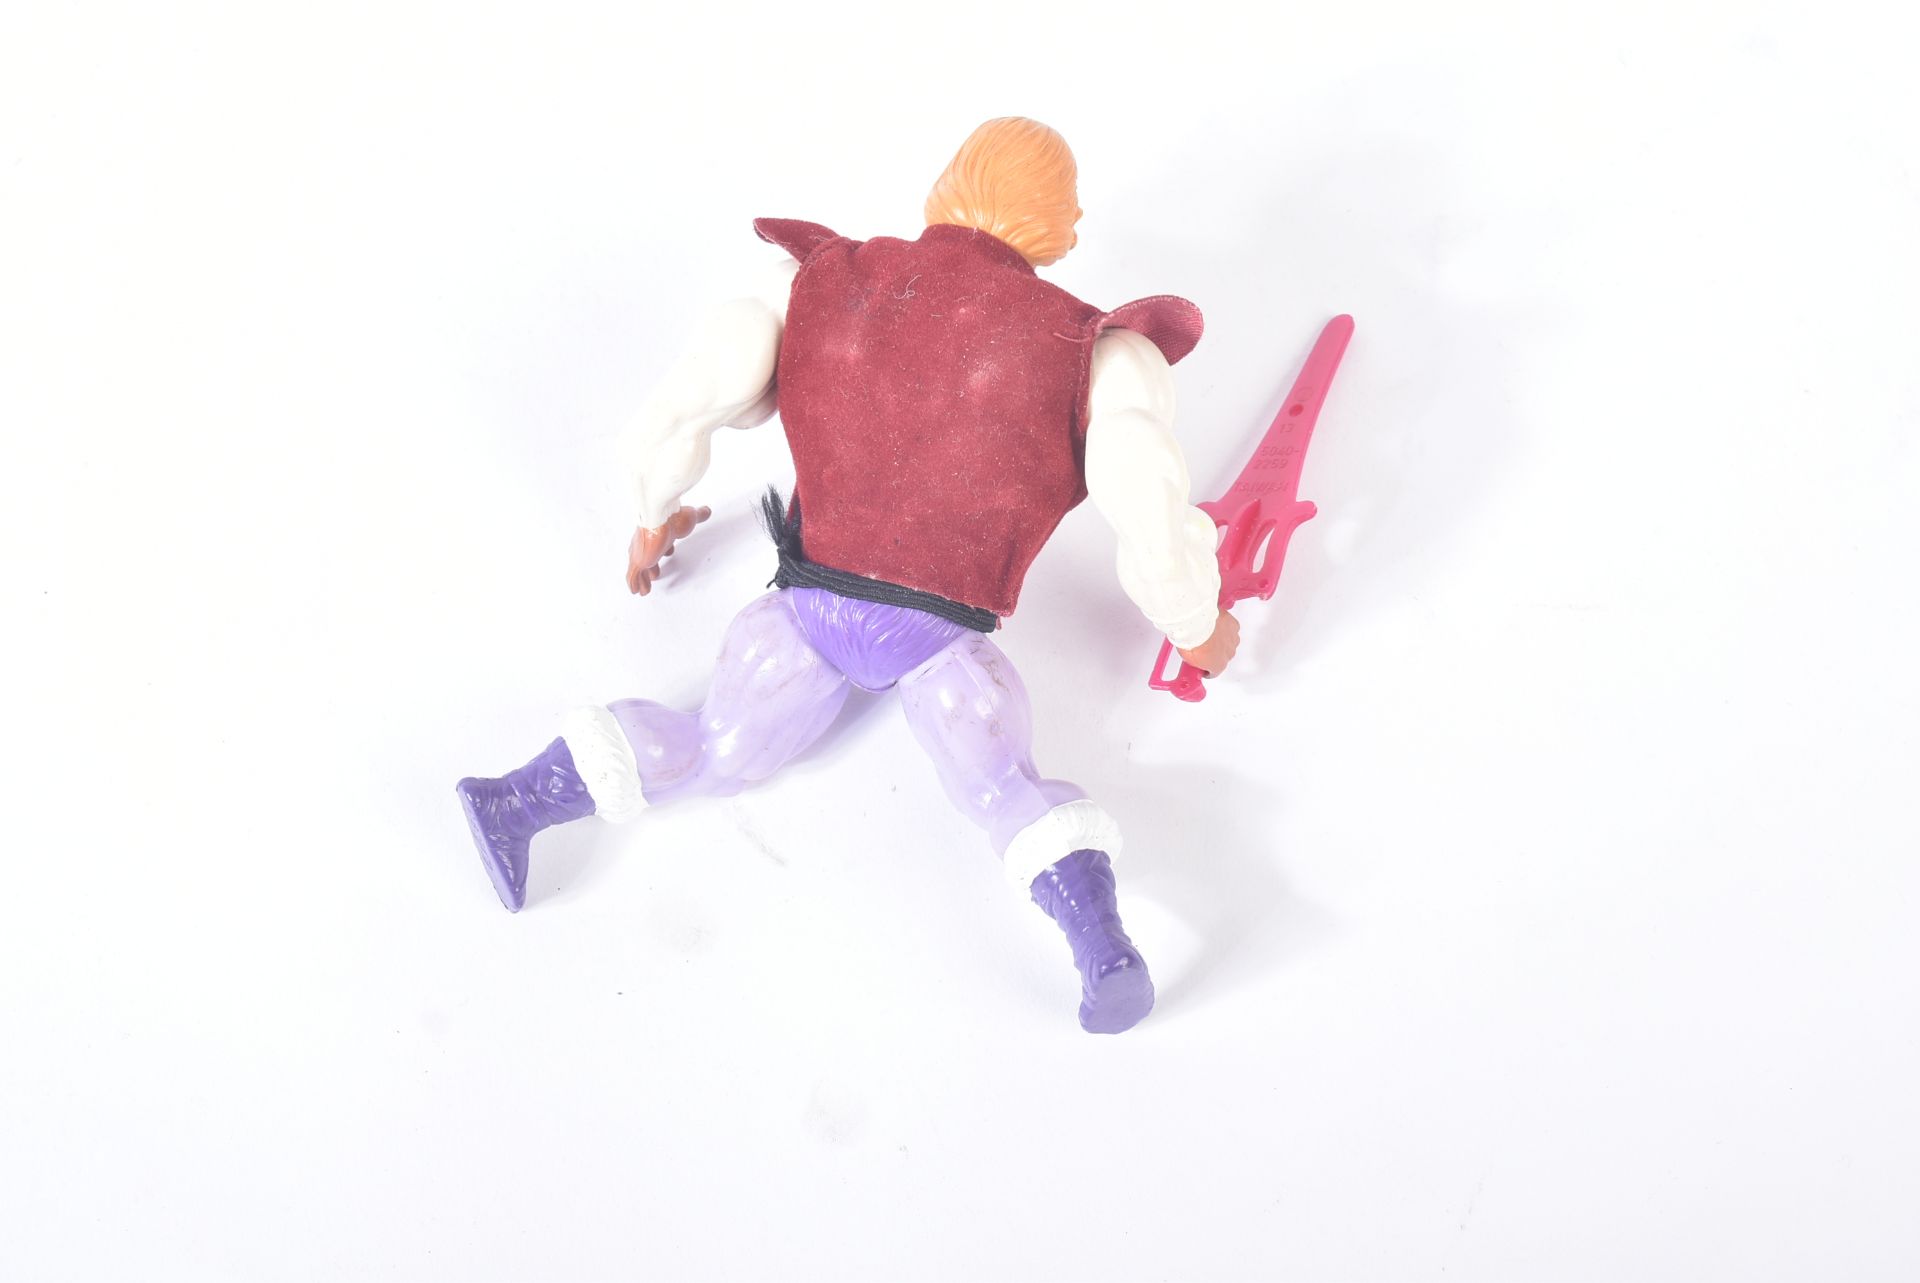 MASTERS OF THE UNIVERSE - VINTAGE MATTEL ACTION FIGURE - Image 6 of 6